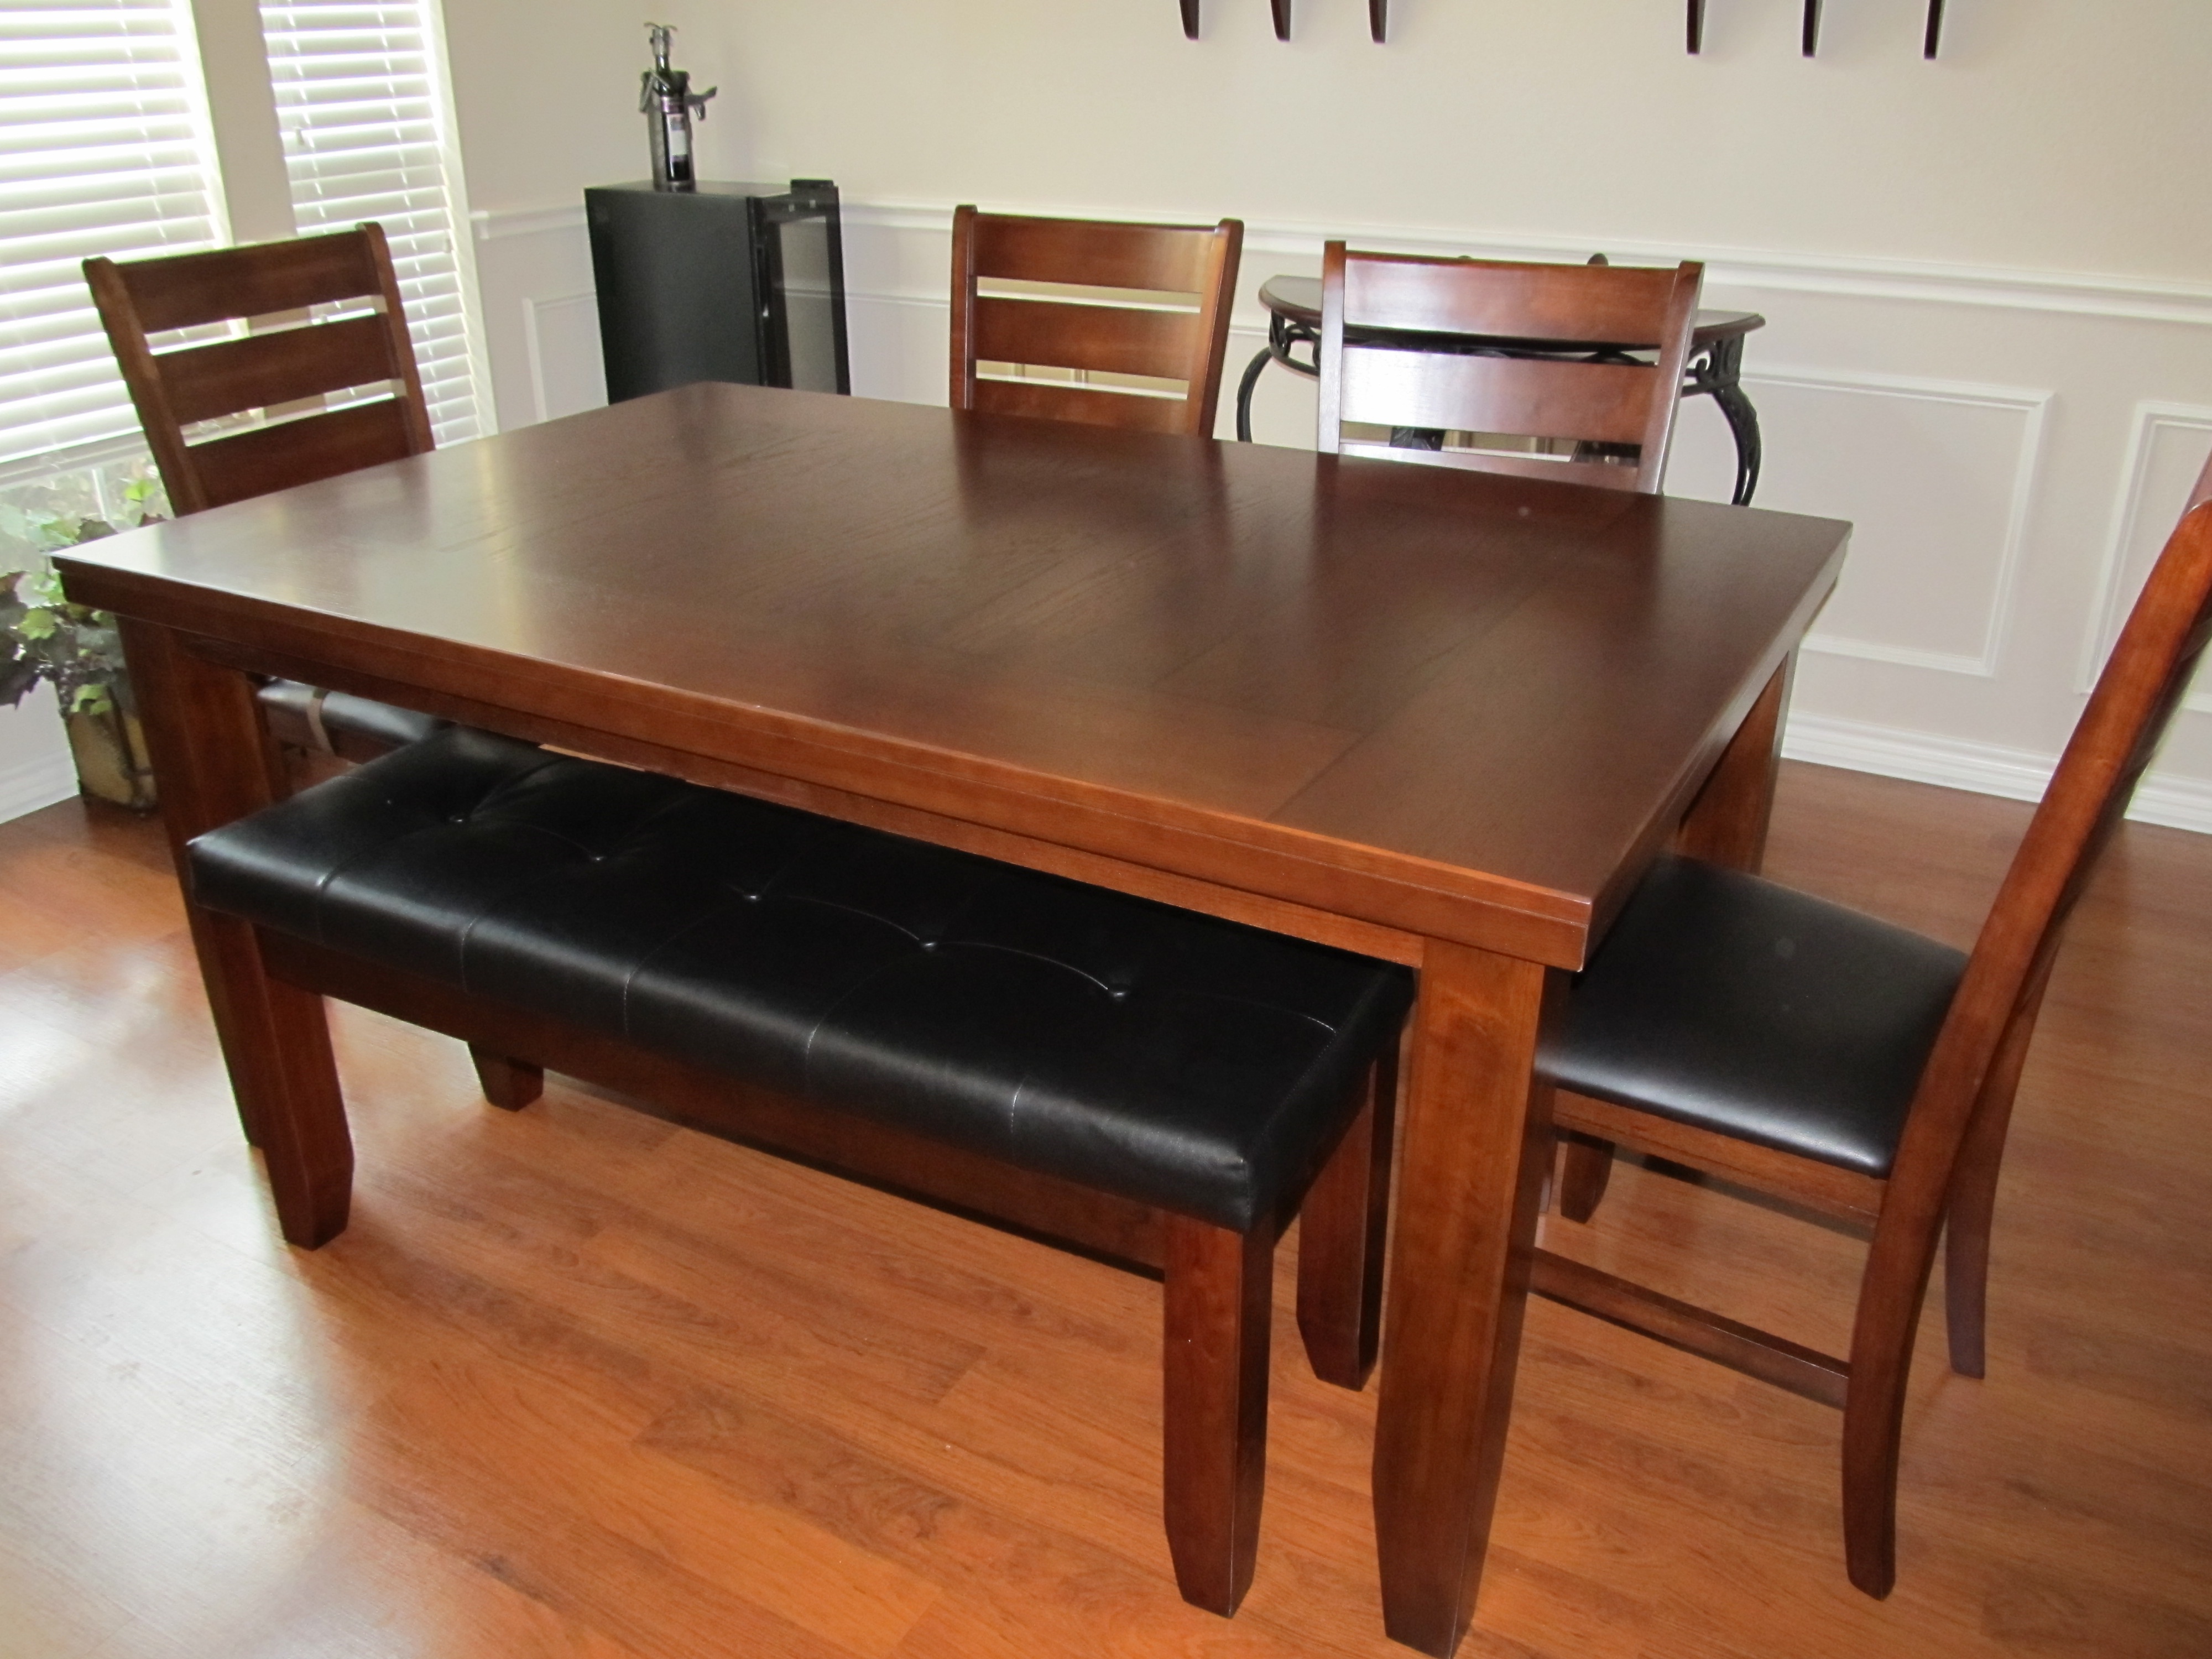 Dining Room Table With Built In Bench Seating